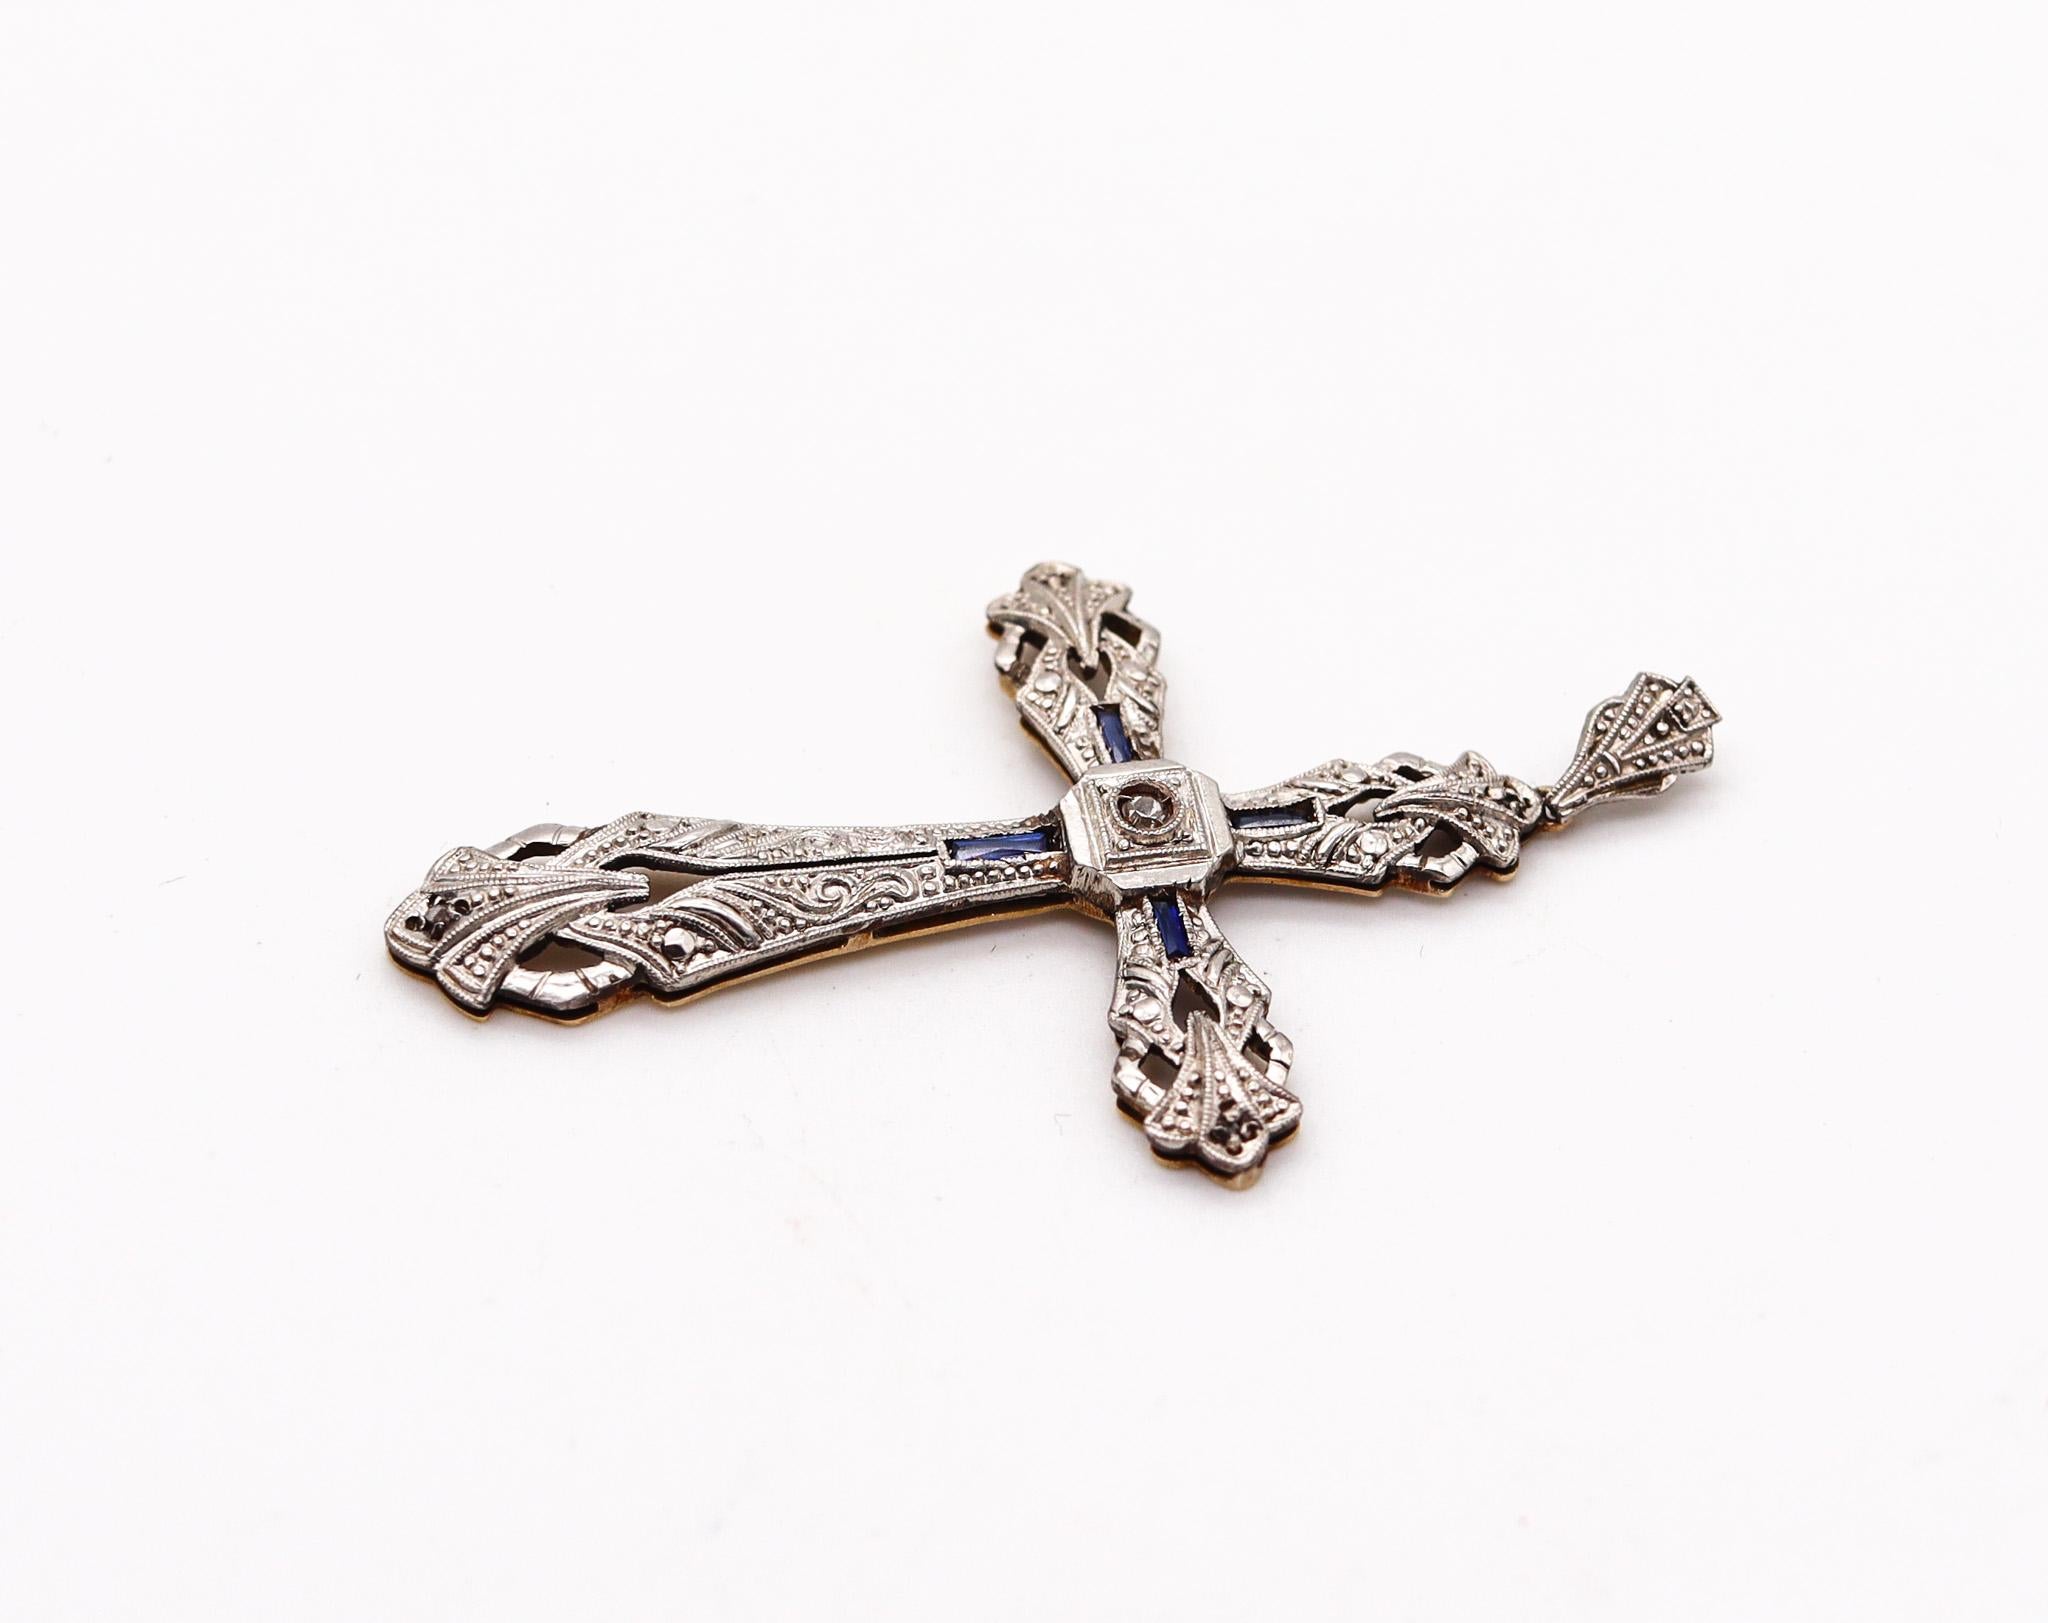 Edwardian belle époque cross.

Beautiful cross from the Belle Epoque period, created during the Edwardian era (1901-1910), back in the 1905. This delicate cross was carefully crafted with classical Edwardian motif in solid yellow gold of 14 karats,